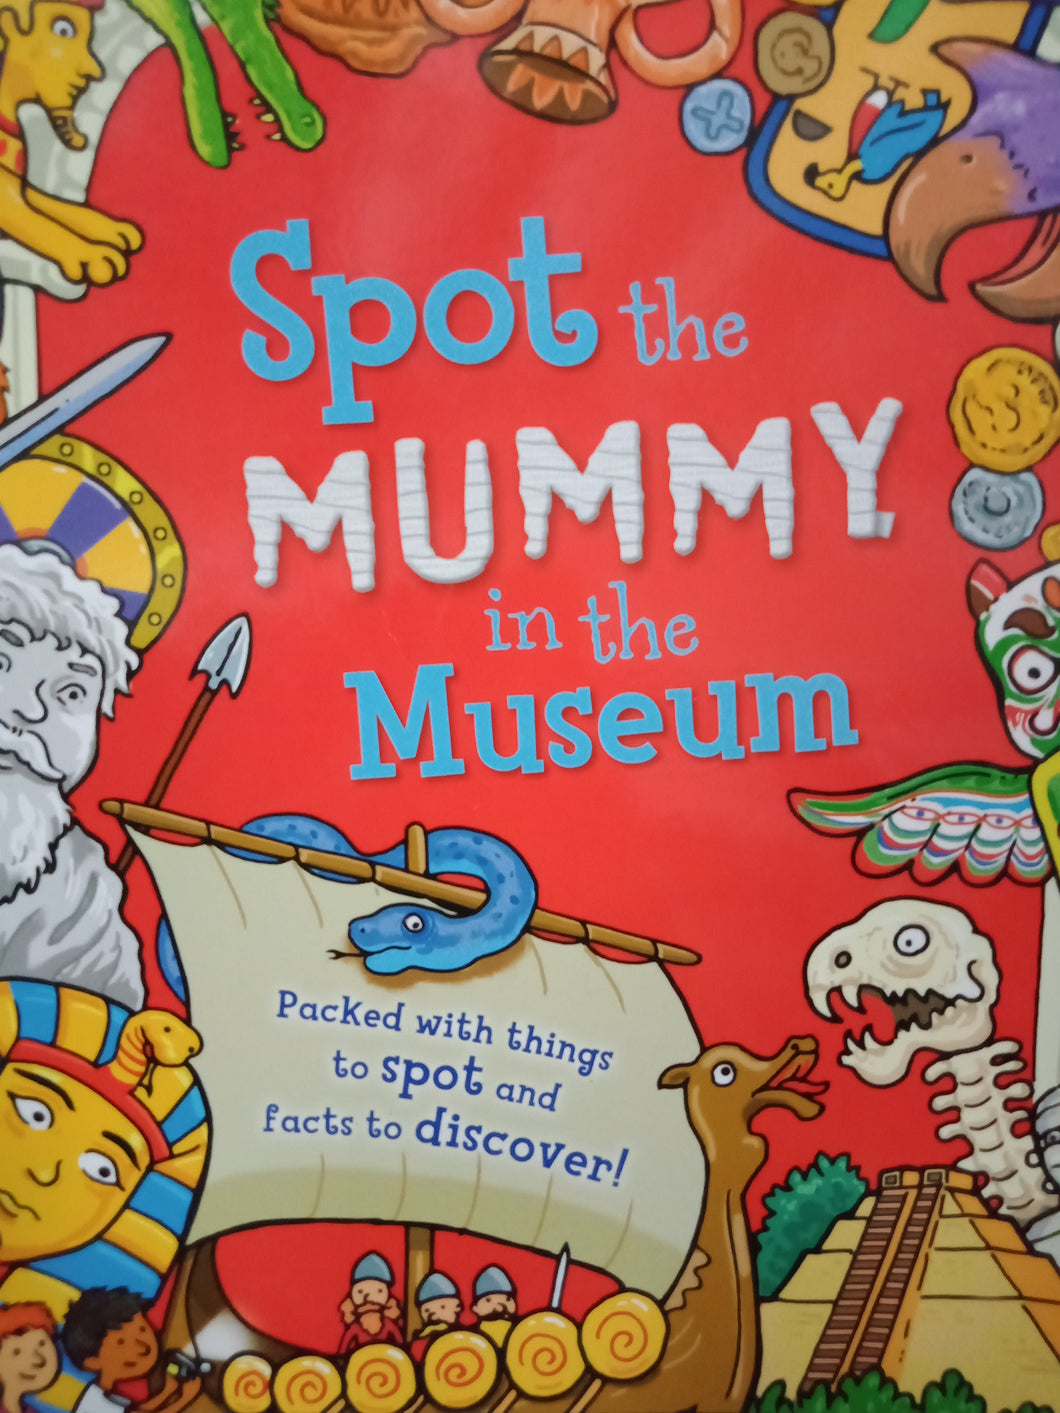 Spot Tha Mummy In The Museum - Books for Less Online Bookstore